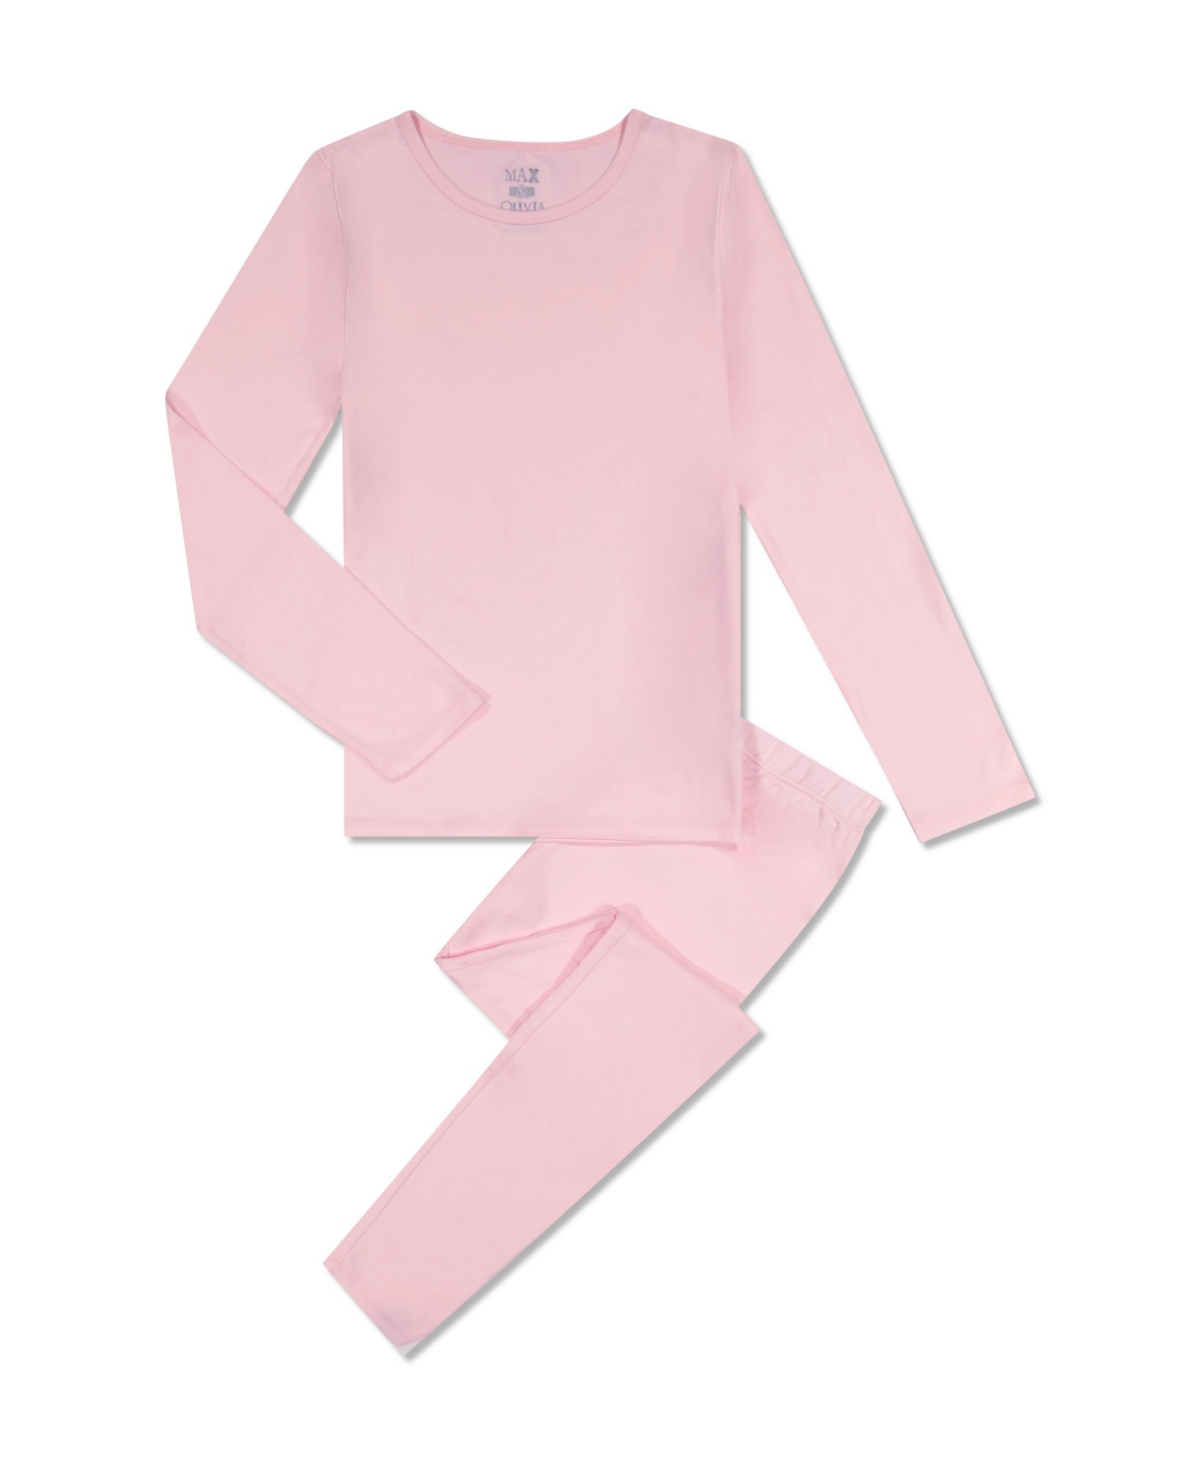 Max & Olivia Big Girls Top And Pants Base Layer Set, 2 Piece In Pink